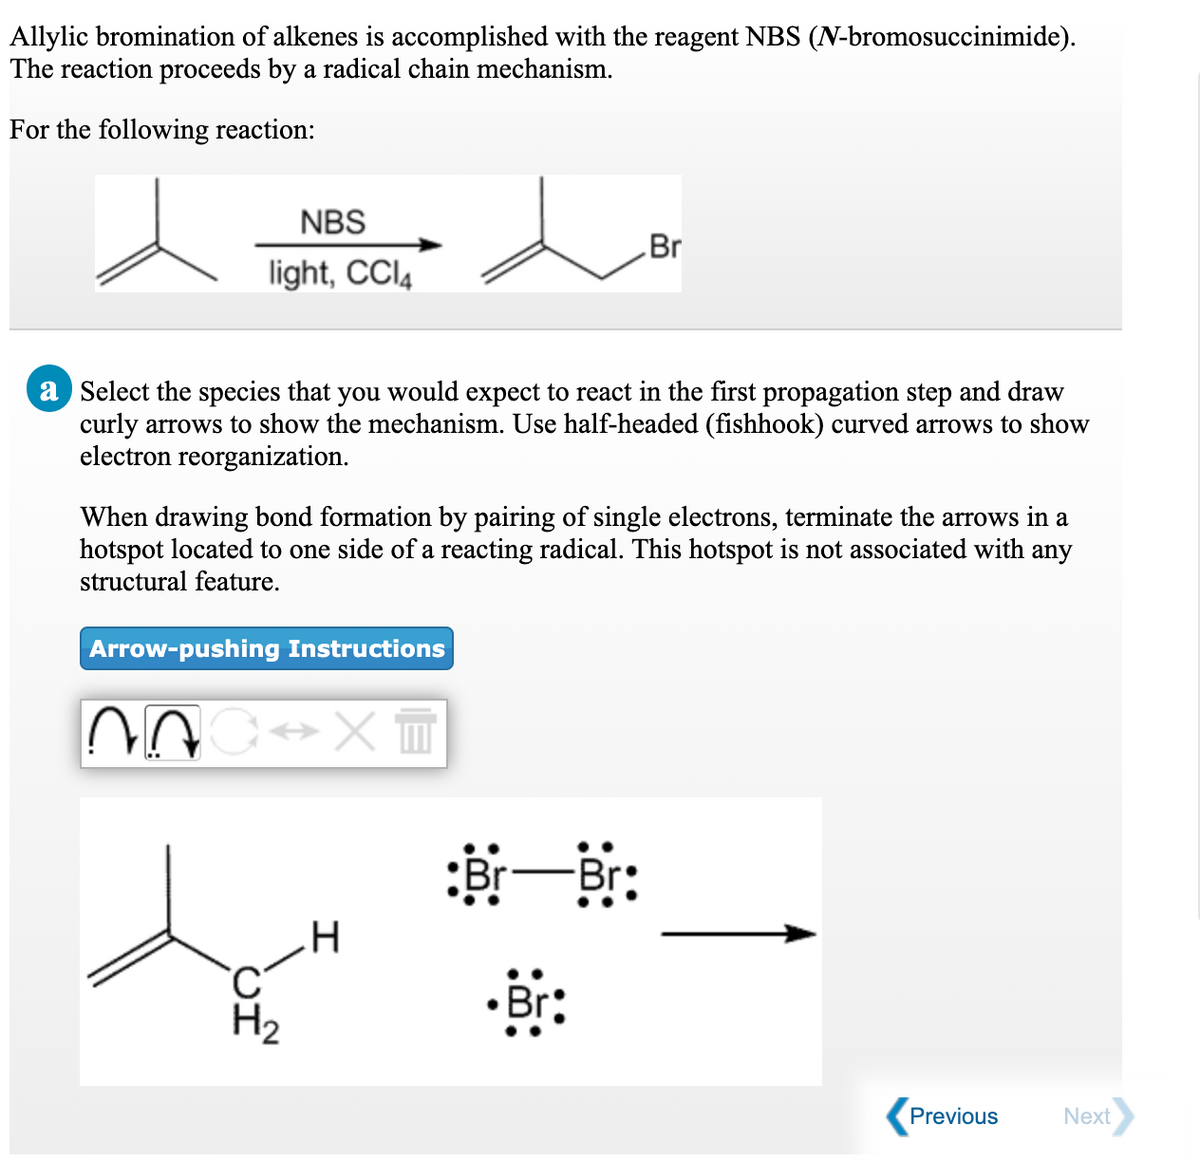 Allylic bromination of alkenes is accomplished with the reagent NBS (N-bromosuccinimide).
The reaction proceeds by a radical chain mechanism.
For the following reaction:
NBS
Br
light, CCI4
a Select the species that you would expect to react in the first propagation step and draw
curly arrows to show the mechanism. Use half-headed (fishhook) curved arrows to show
electron reorganization.
When drawing bond formation by pairing of single electrons, terminate the arrows in a
hotspot located to one side of a reacting radical. This hotspot is not associated with any
structural feature.
Arrow-pushing Instructions
将一郎:
Br
H2
Previous
Next
